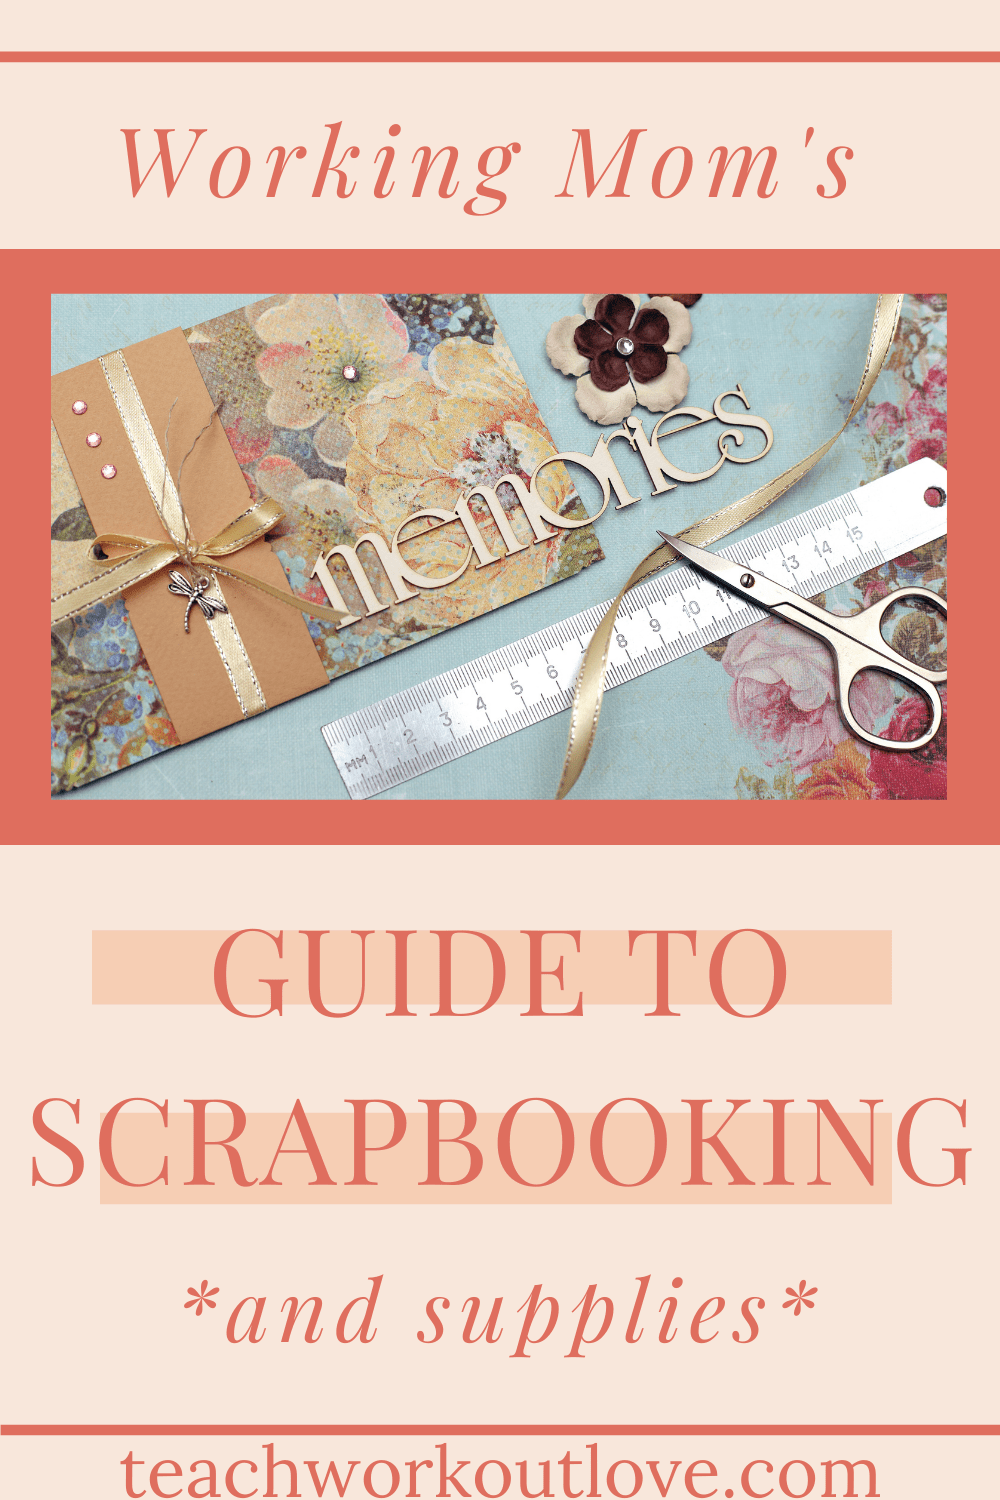 Working moms guide for scrapbooking design. Invest in a good scrapbook kit as it allows you and your kid to enjoy the crafting experience.